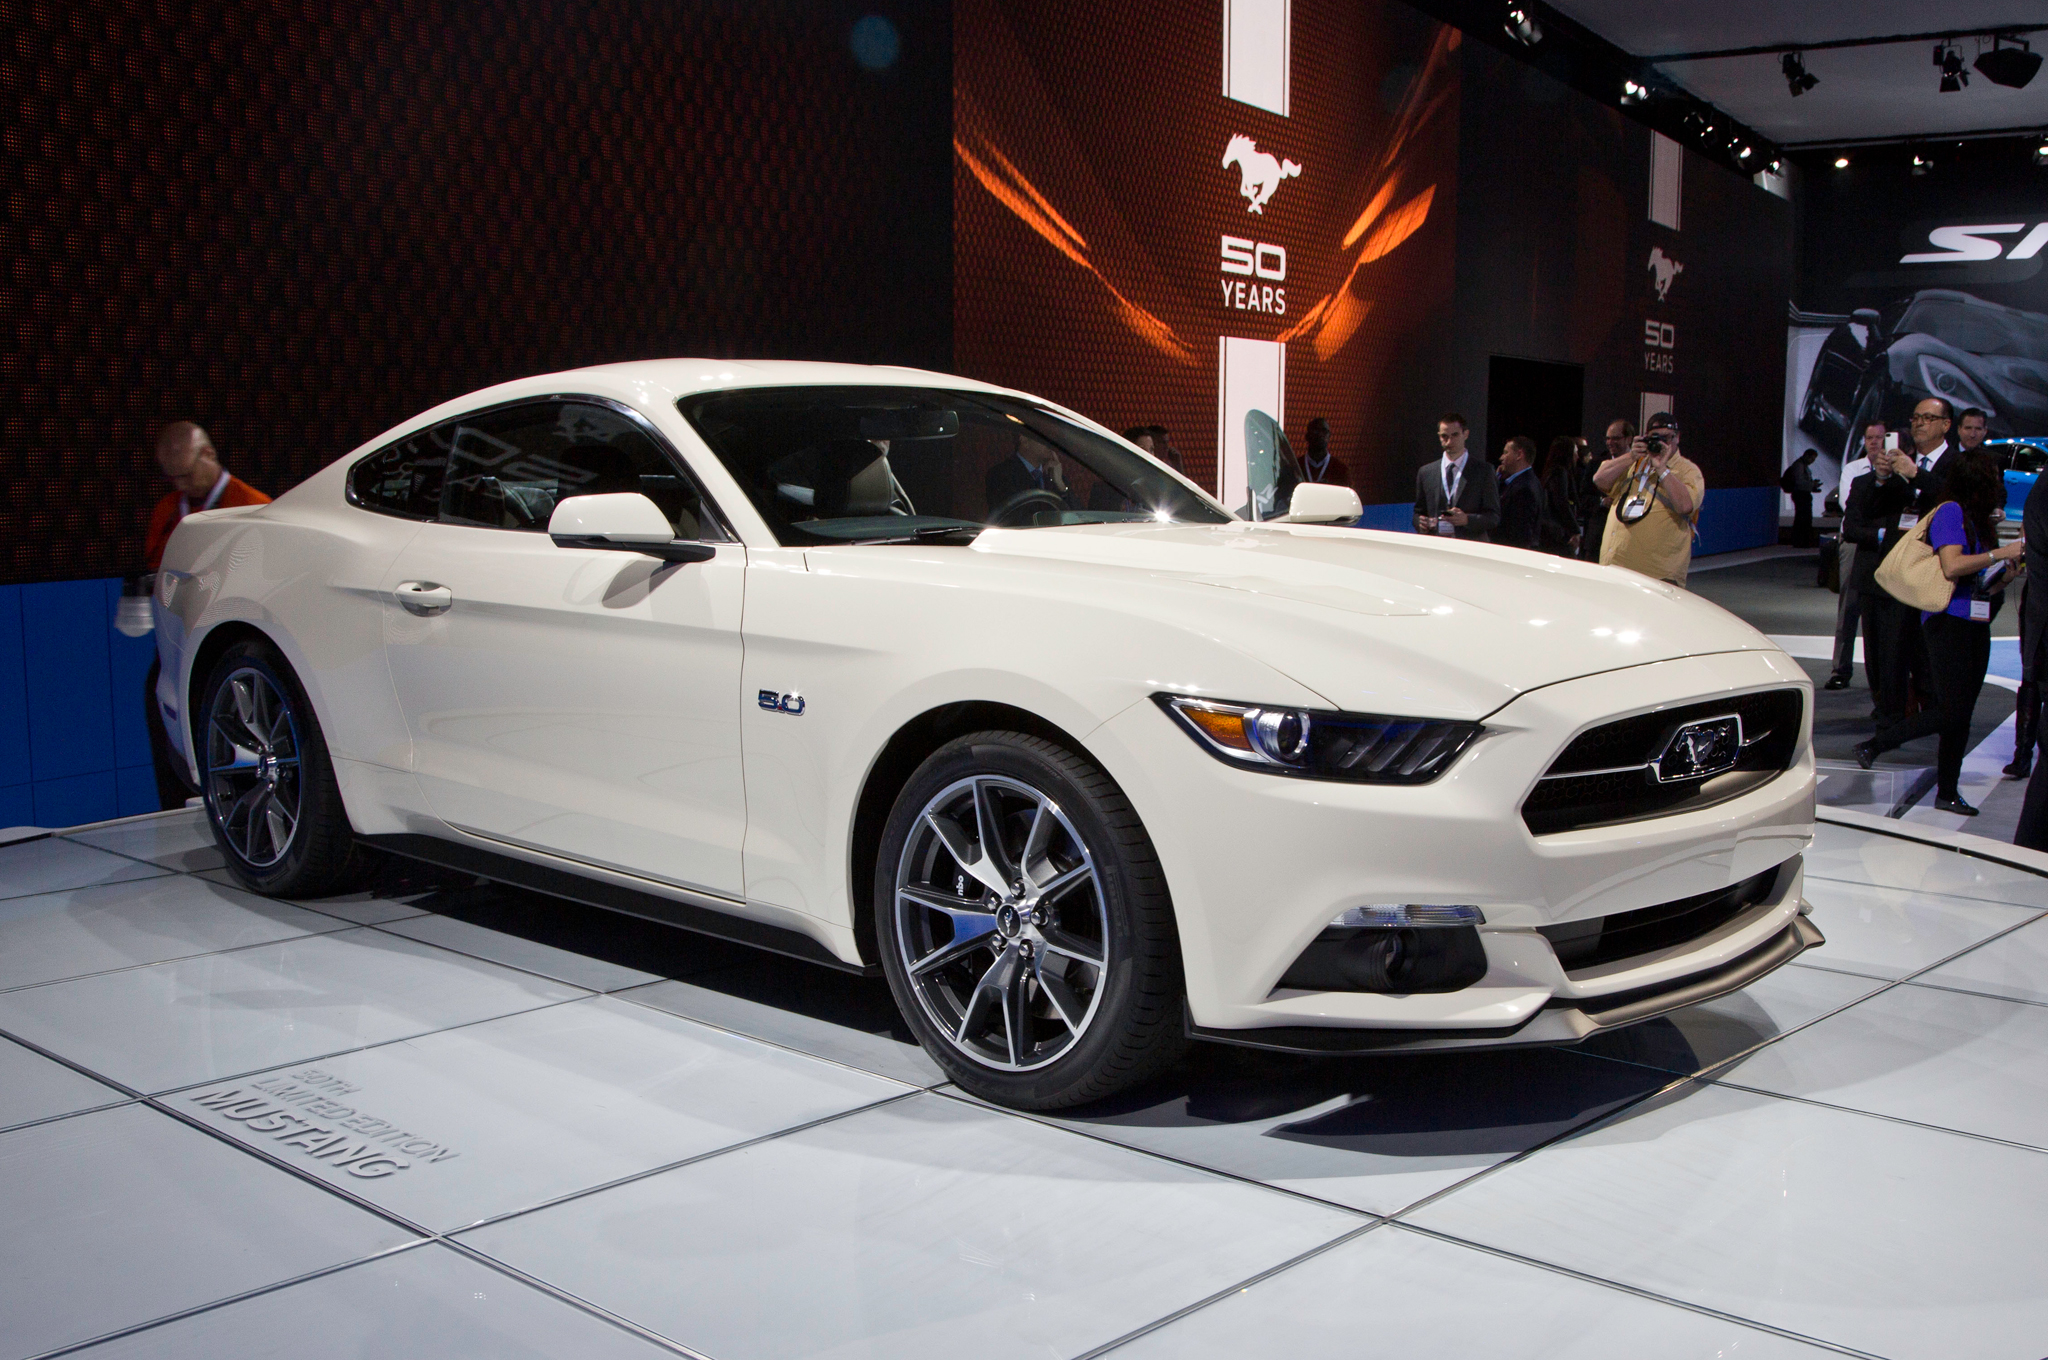 Ford To Auction Off Limited Edition 50th Anniversary Mustang